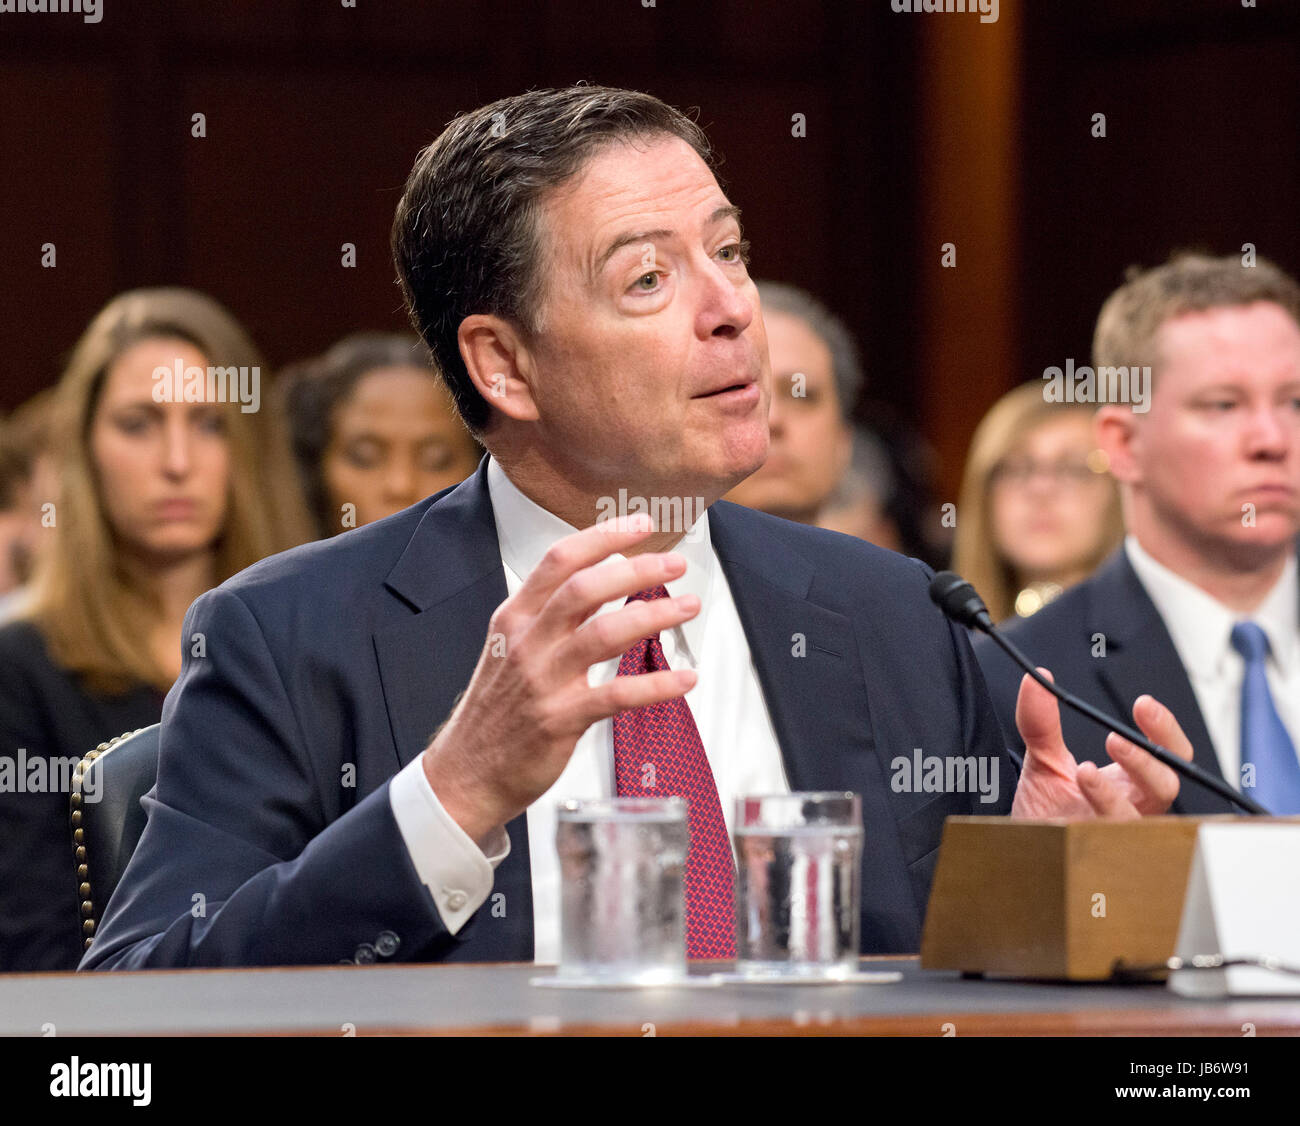 Former FBI Director James Comey testifies before United States Senate Select Committee on Intelligence on the Russian intervention in the 2016 Presidential election on Capitol Hill in Washington, DC on Thursday, June 8, 2017. Credit: Ron Sachs / CNP (RESTRICTION: NO New York or New Jersey Newspapers or newspapers within a 75 mile radius of New York City) Photo via Newscom Stock Photo